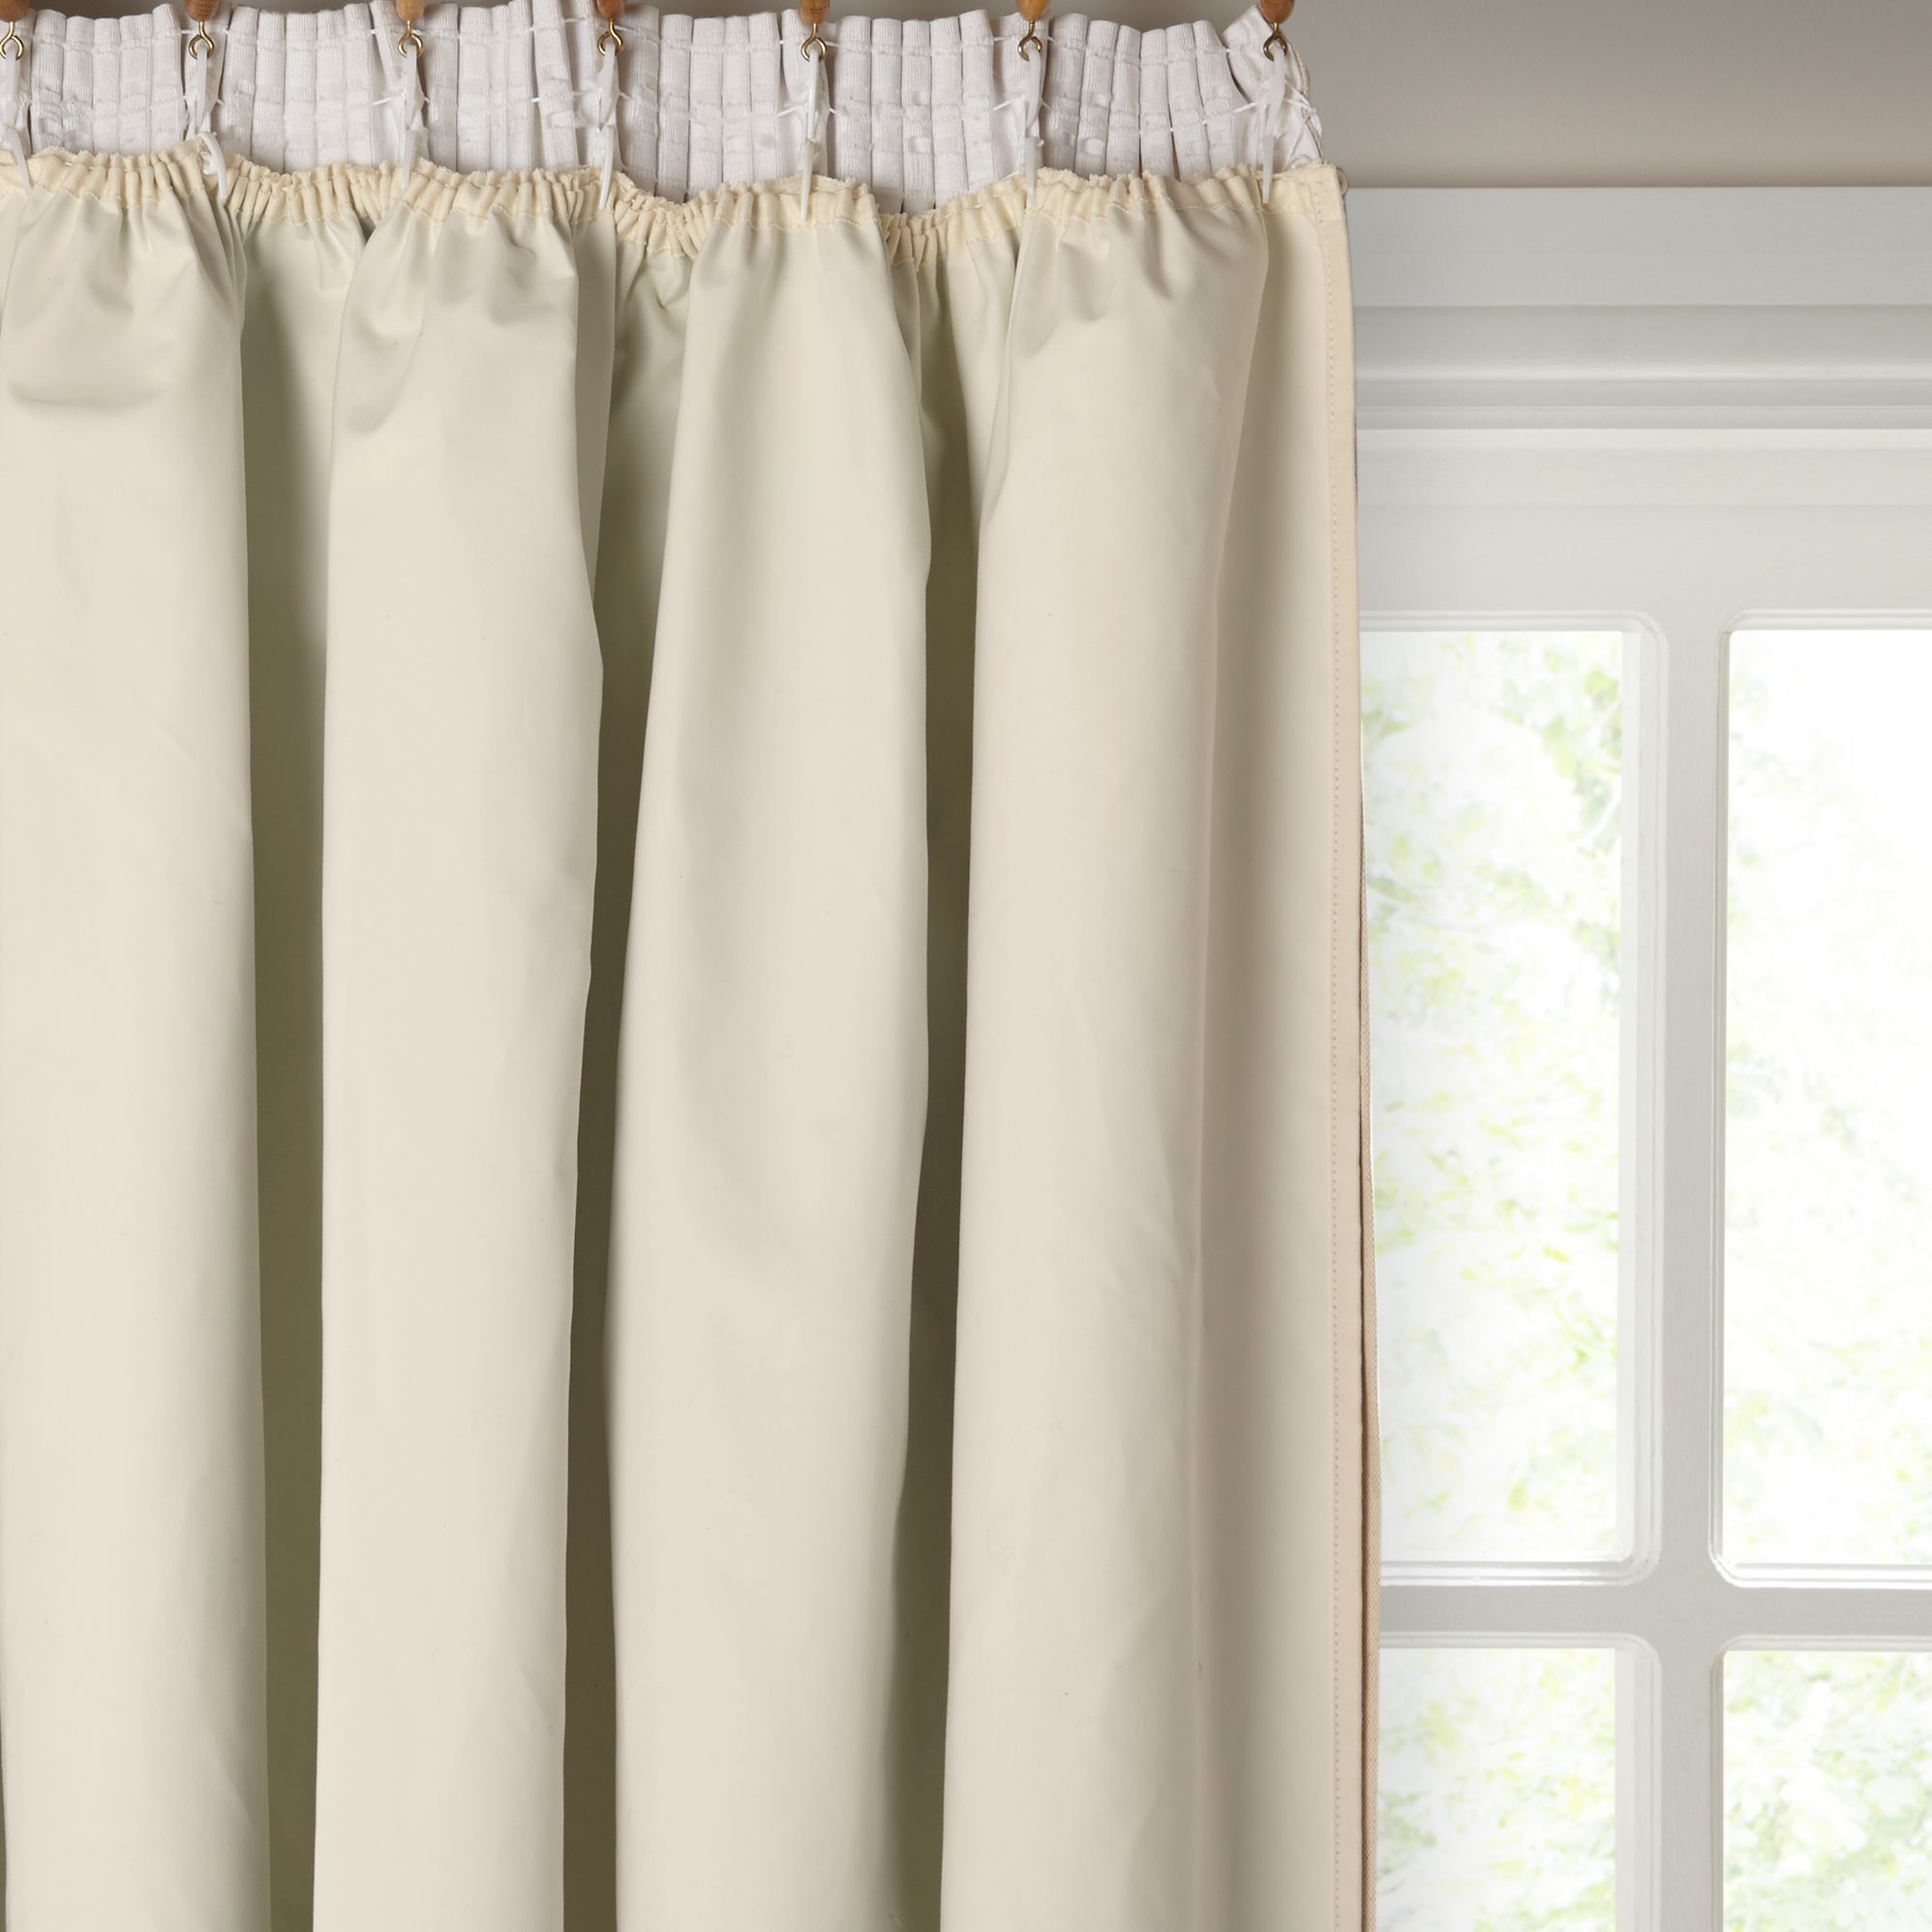 John Lewis & Partners Thermal Curtain Linings, Ivory